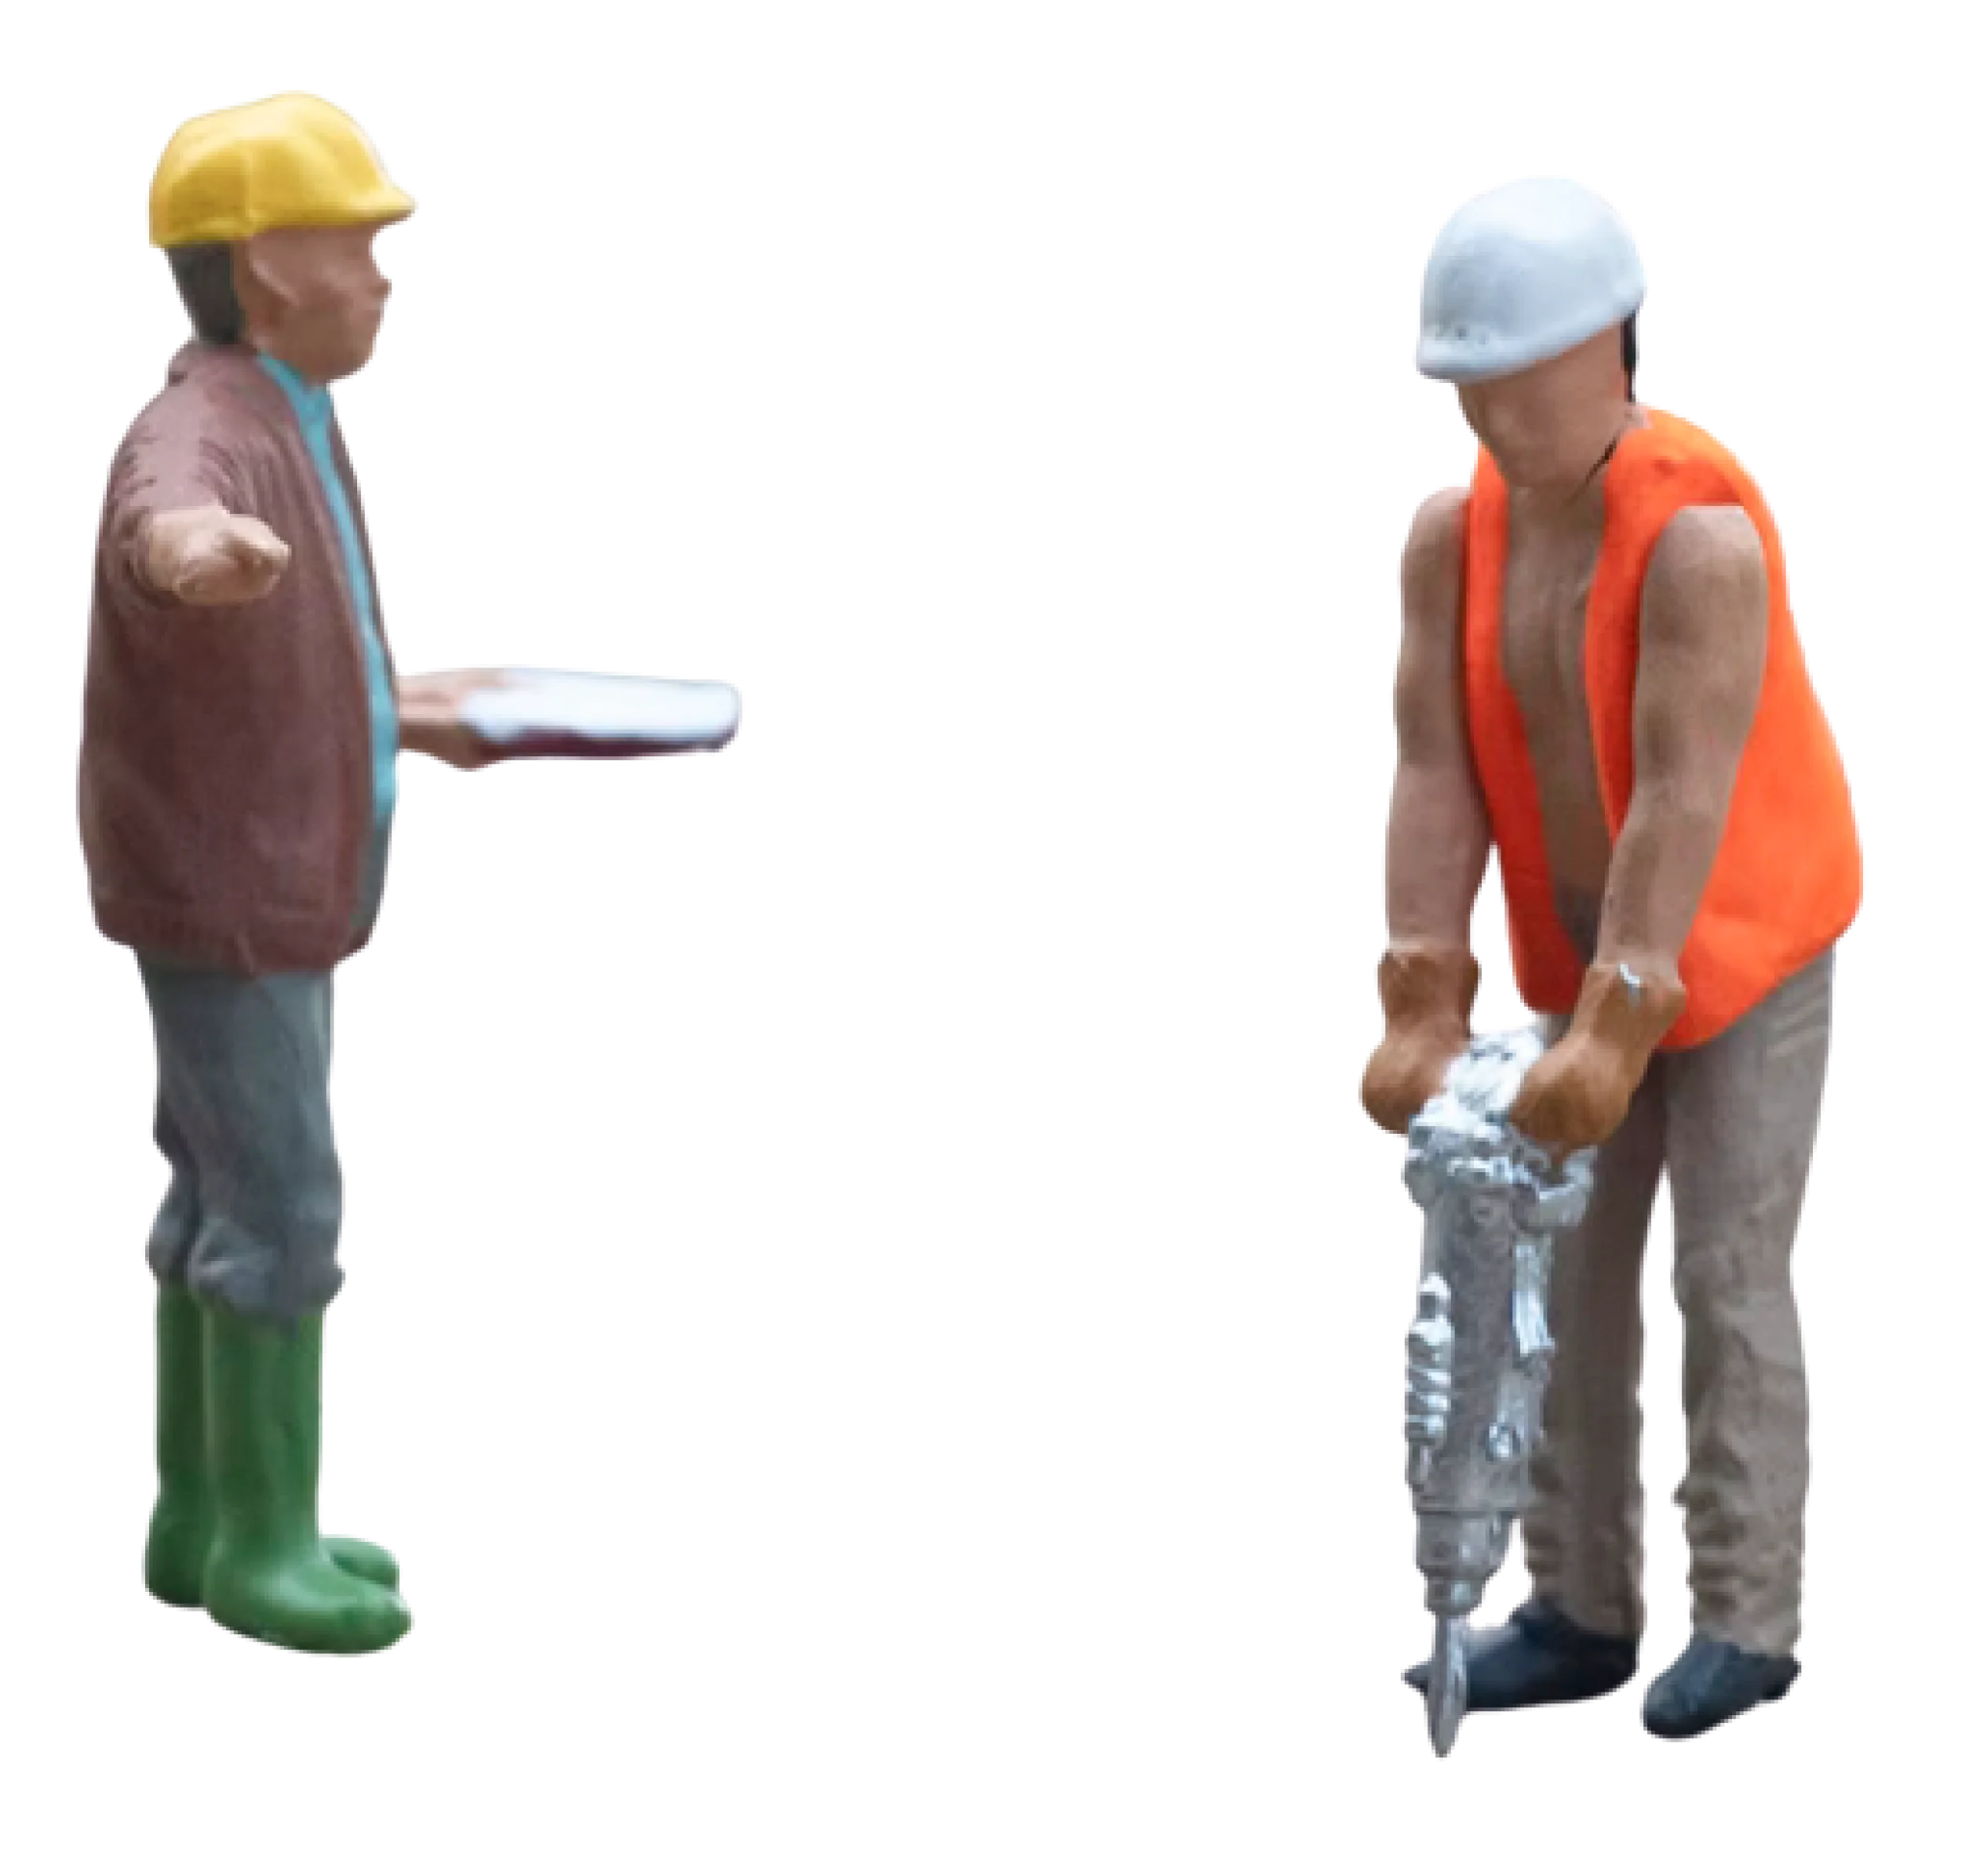 Two figurines of a construction worker and a construction worker.